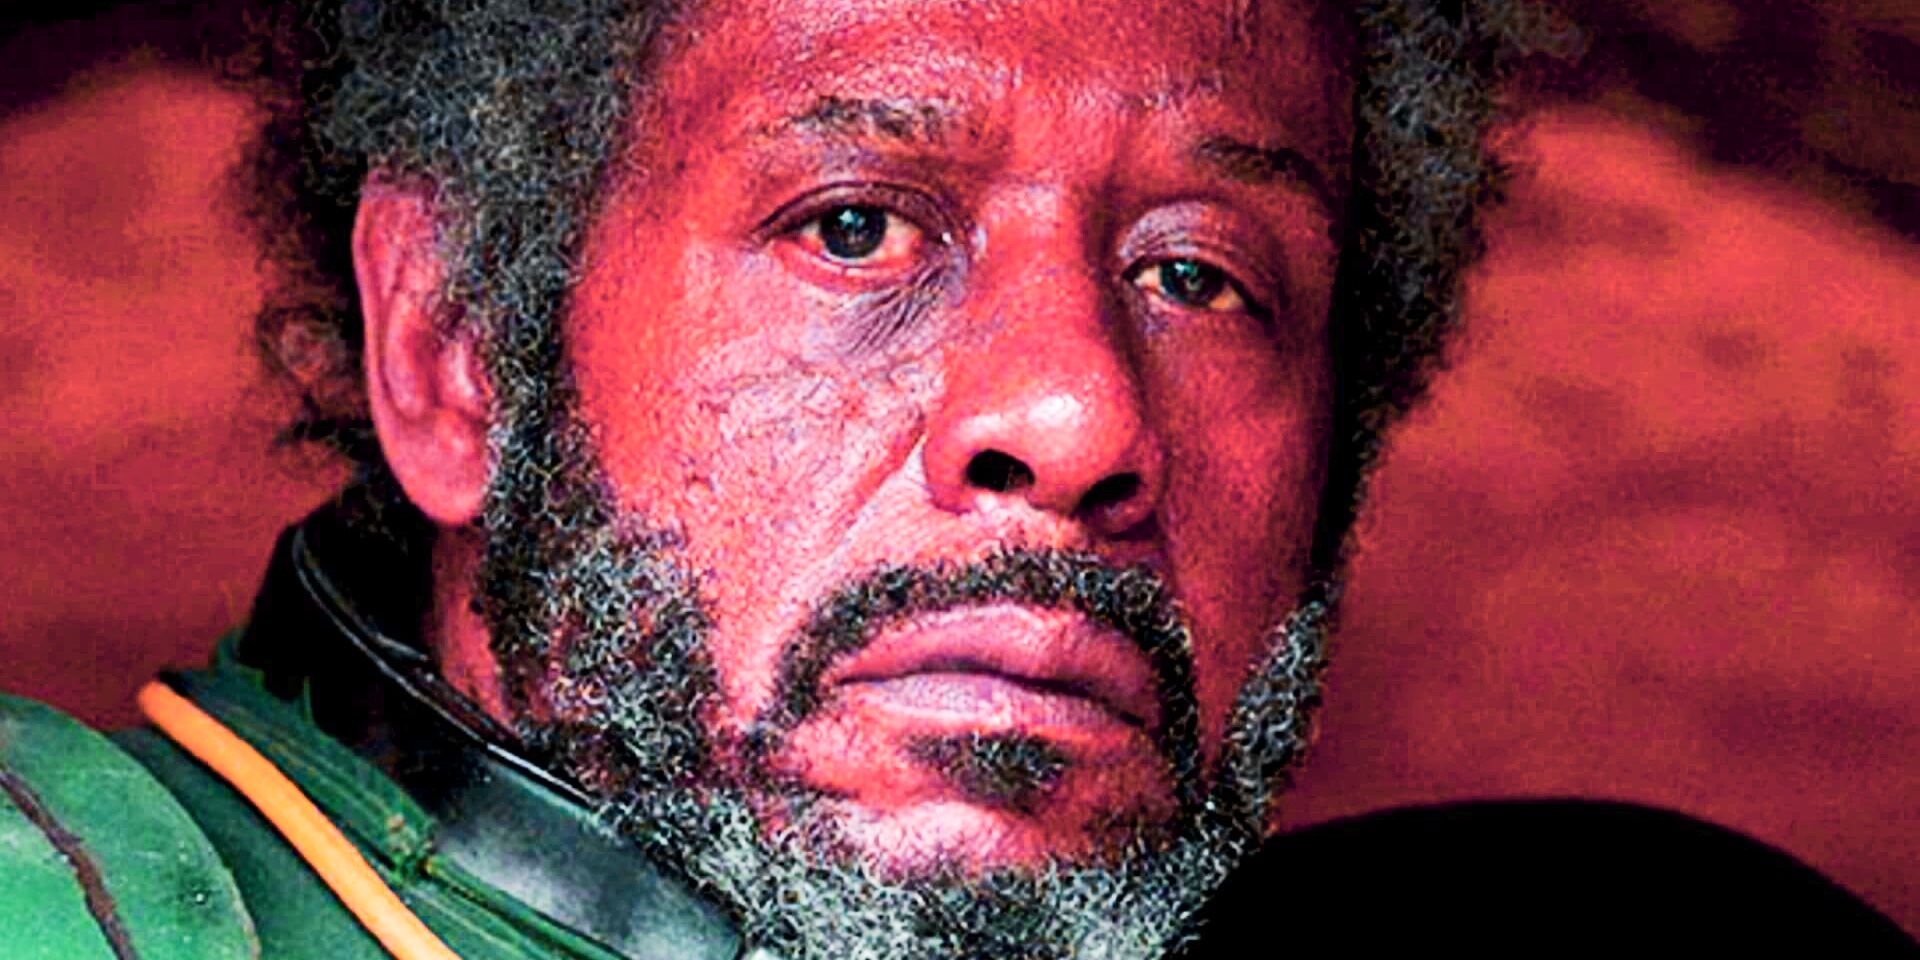 forrest whittaker as saw gerrera in andor and rogue one